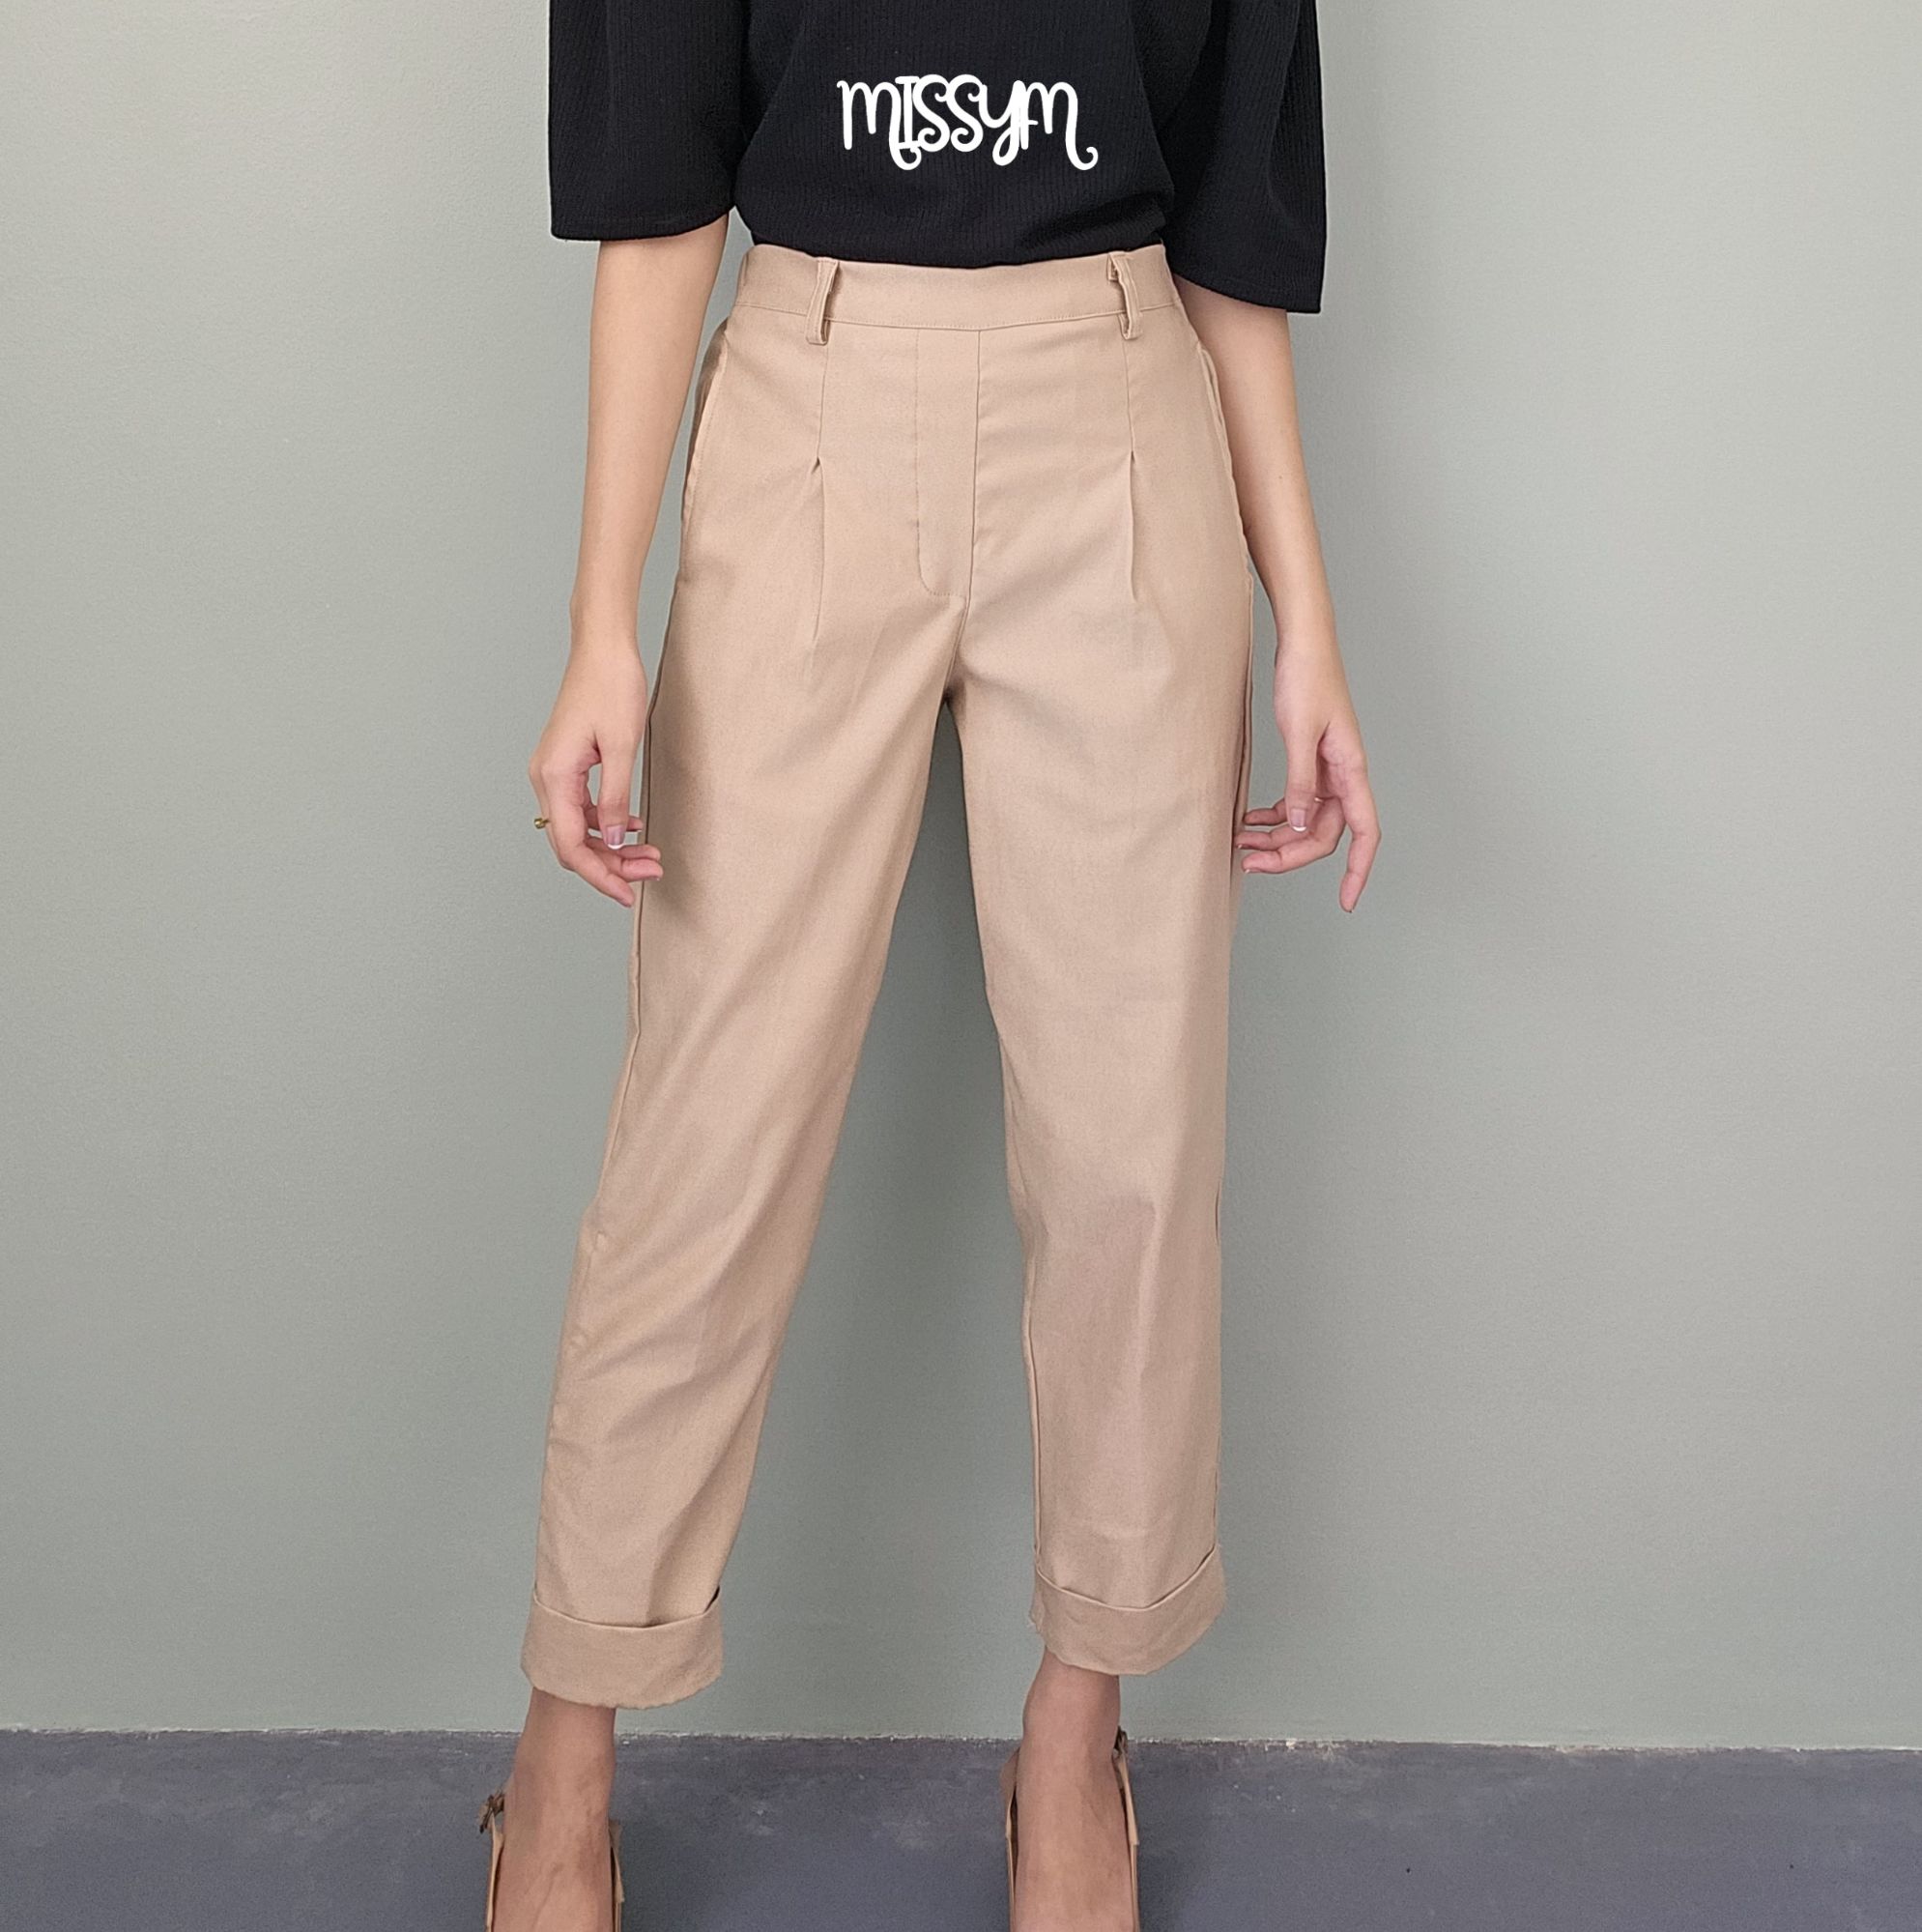 High Waist Plicated Detail Pants With Side Pockets and Belt Holes Trouser  Pants 19A0054